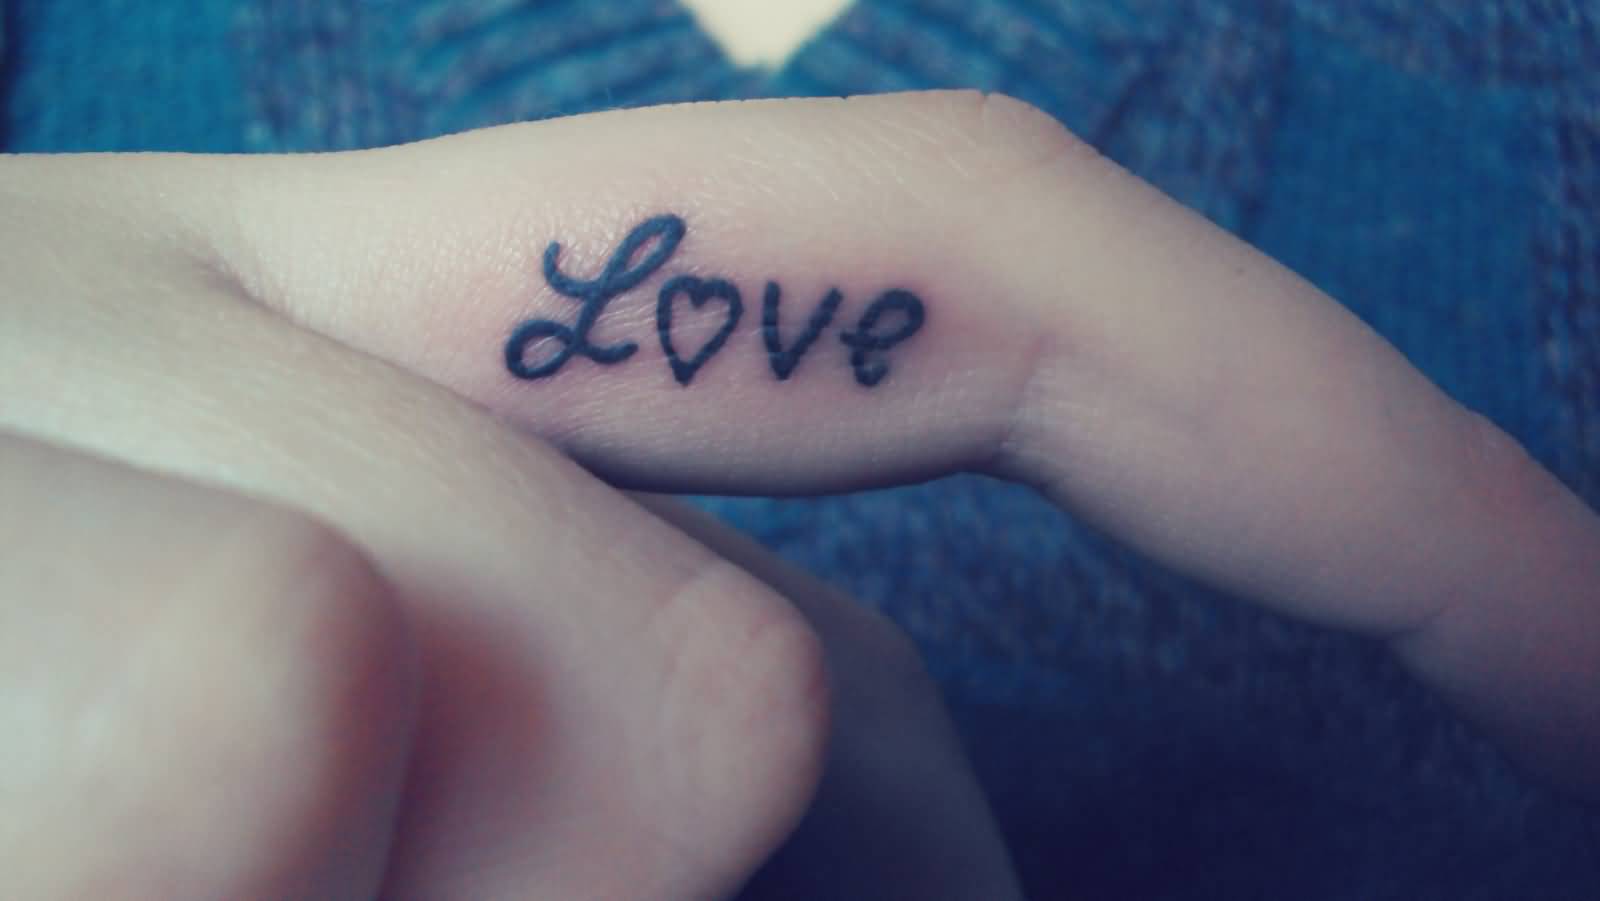 Cute Love Tattoo On Finger By Coralline